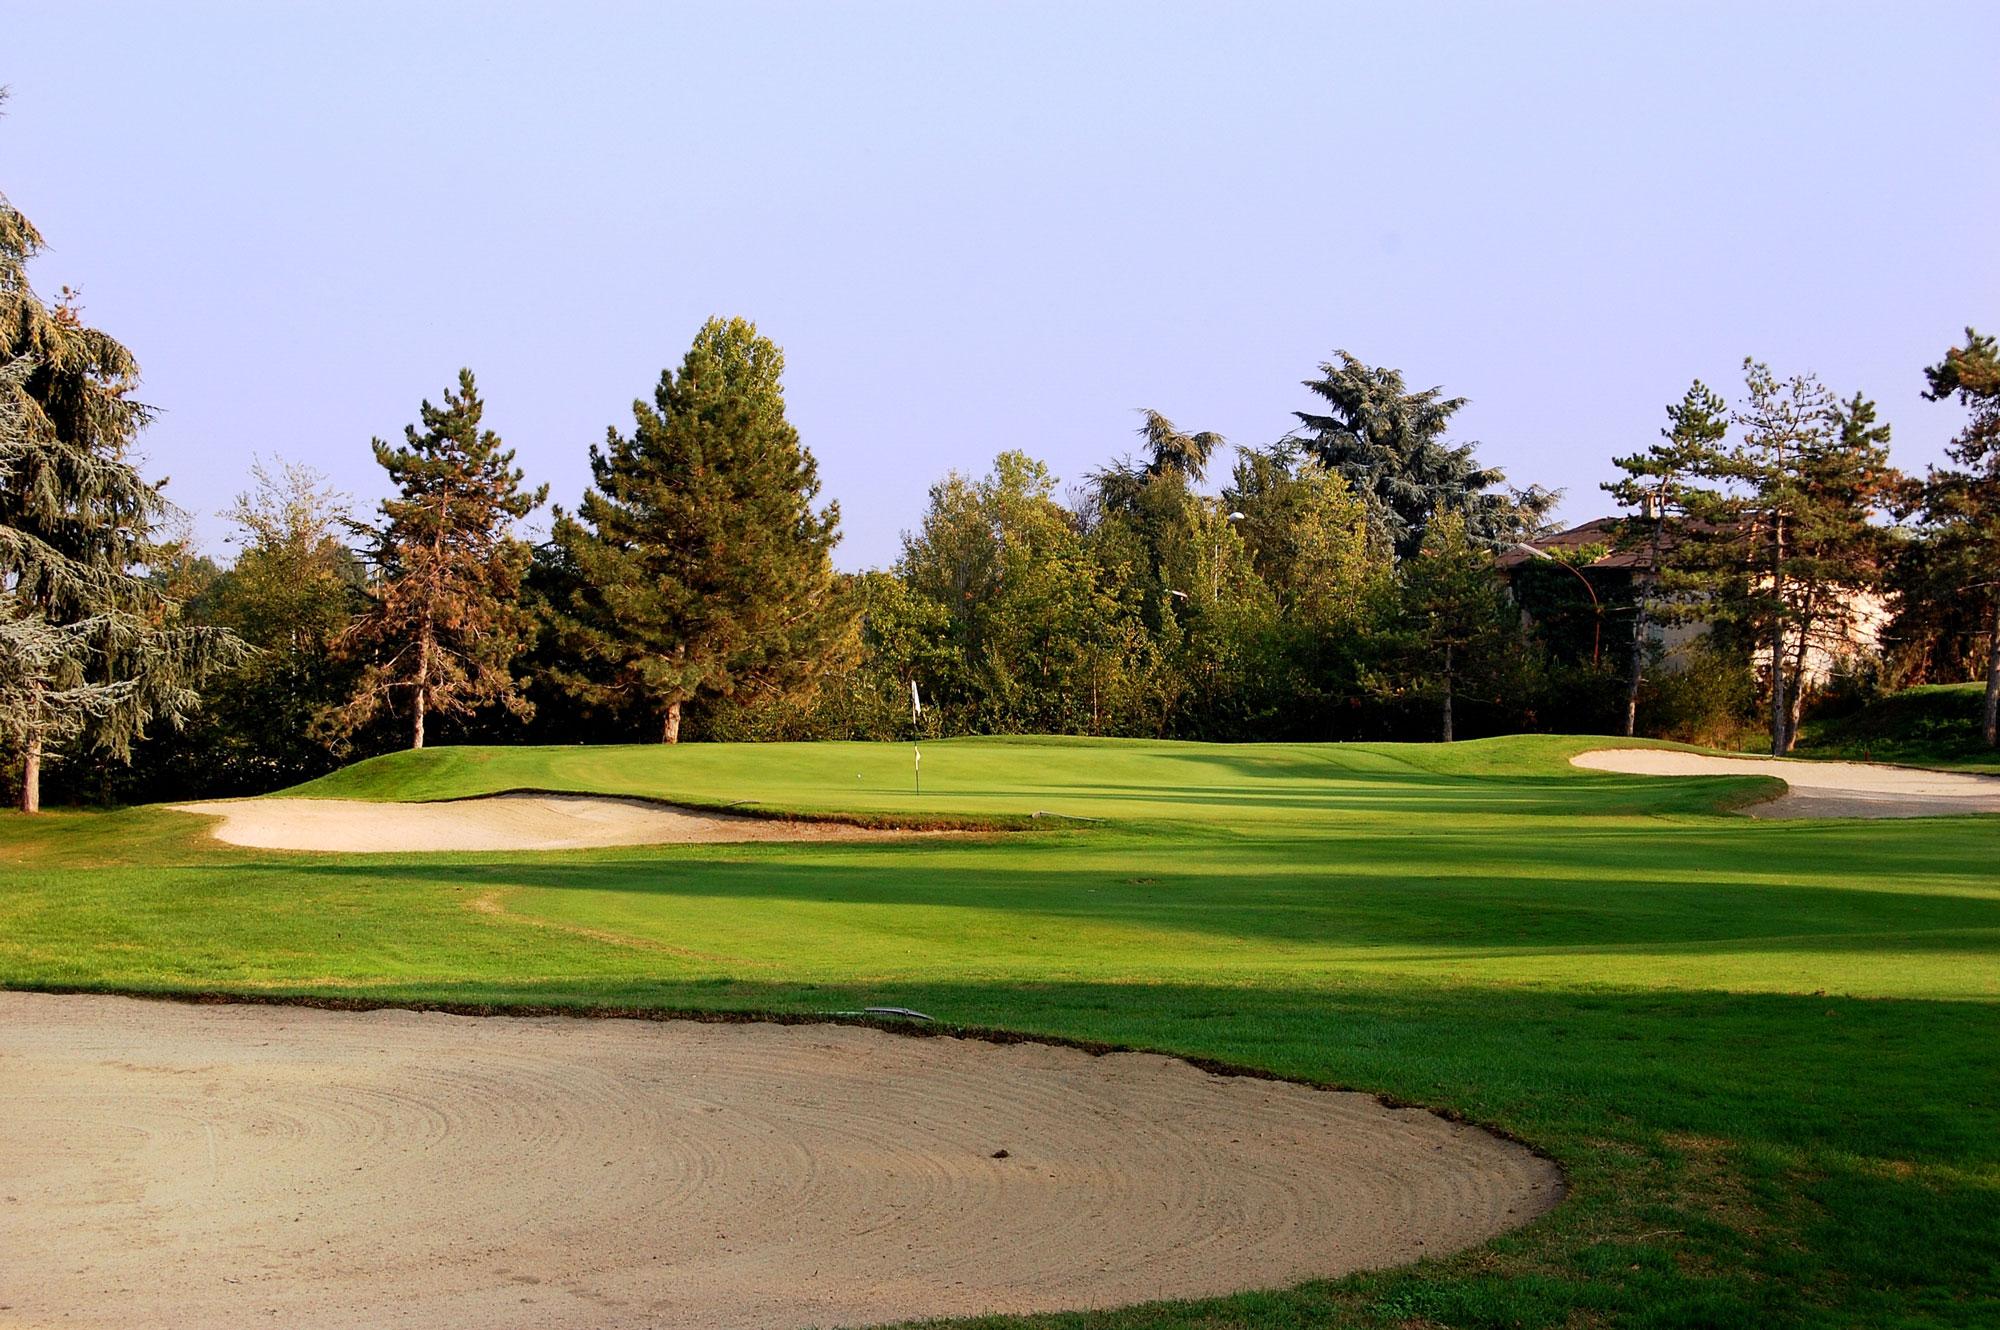 View Golf Club Bologna's picturesque golf course in dramatic Northern Italy.